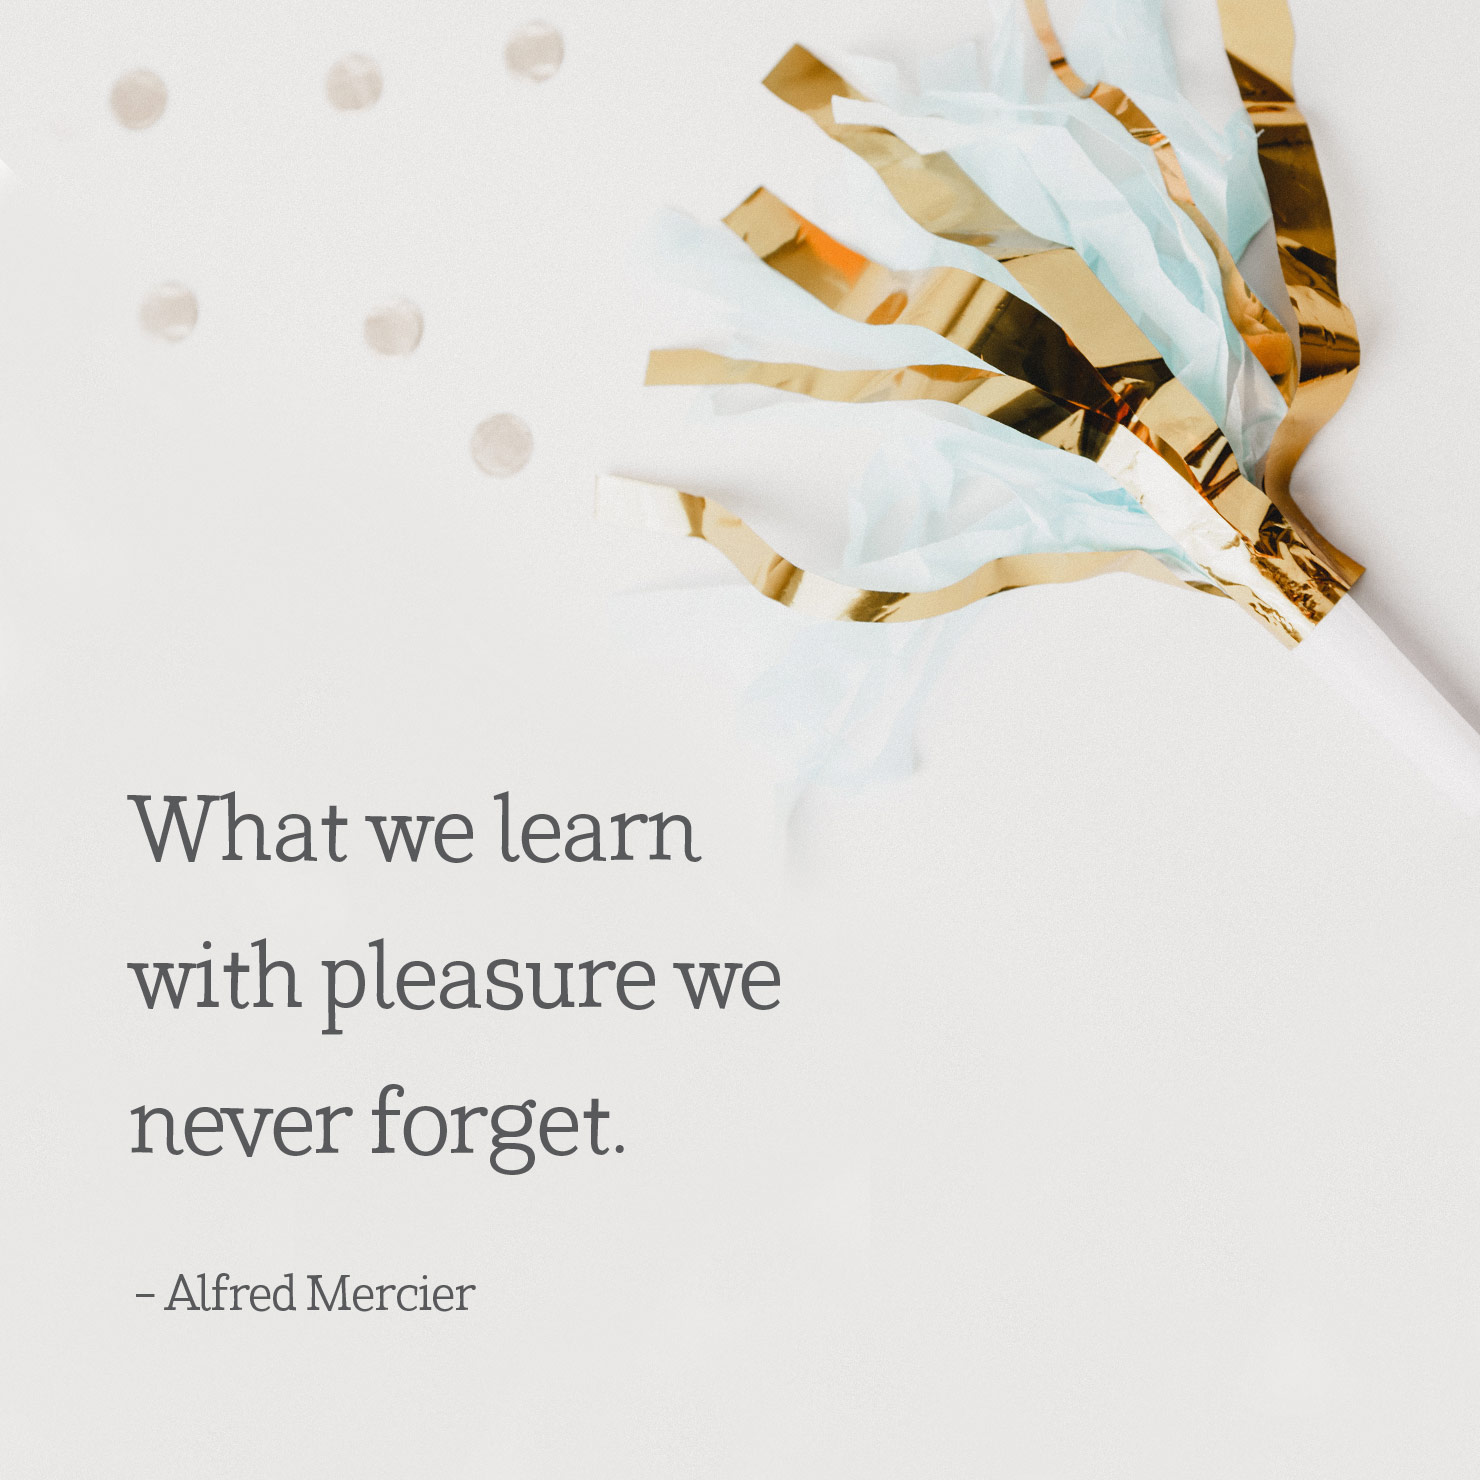 college graduation quote: what we learn with pleasure we never forget - Alfred Mercier